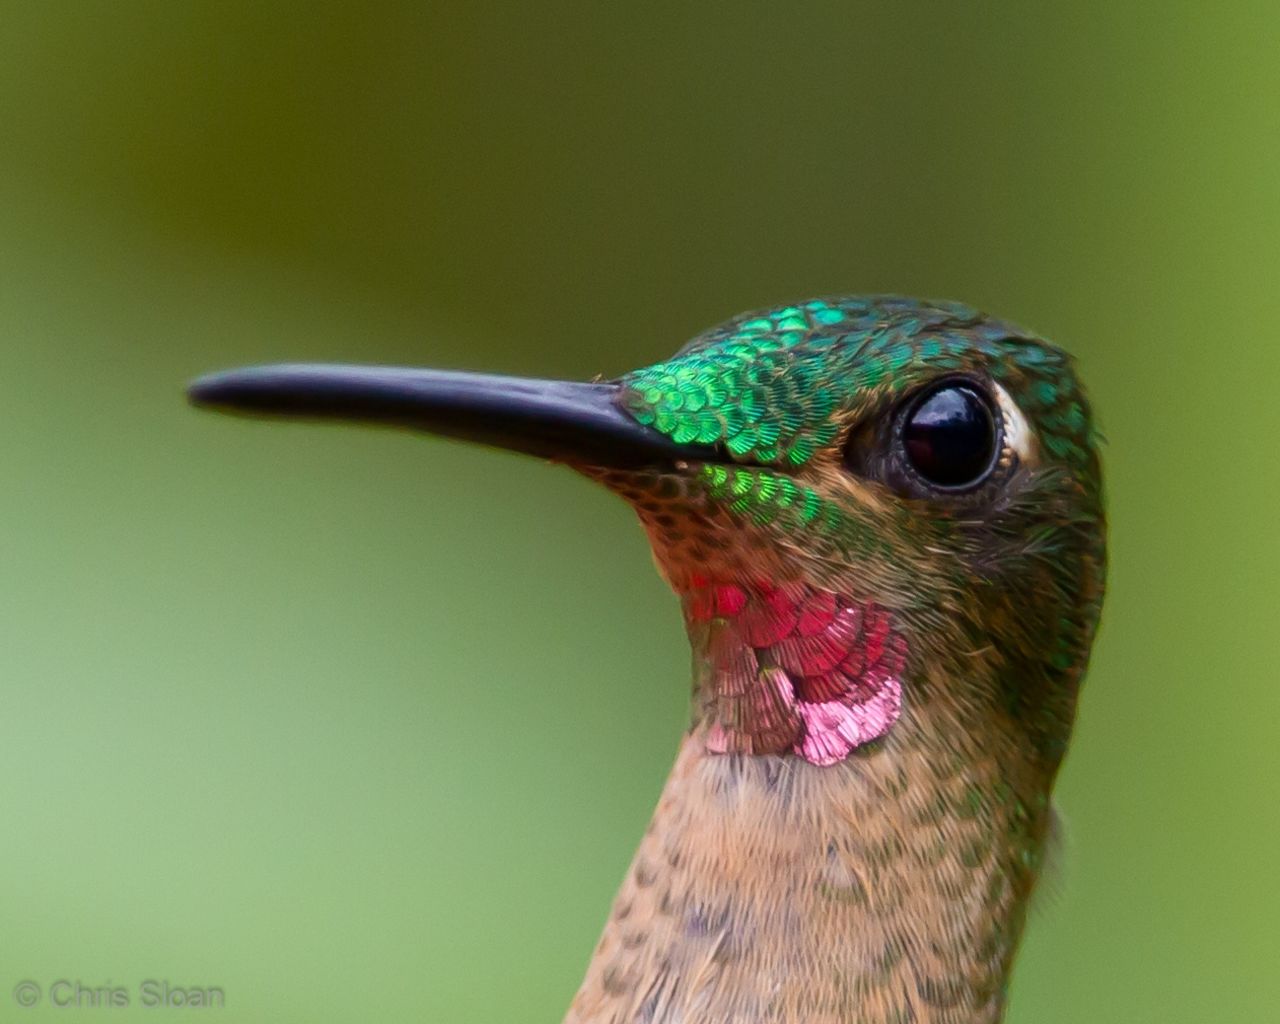 The pink-throated brilliant is a member of the hummingbird family and is native to Colombia, Ecuador and Peru. It is classified as "vulnerable" by the IUCN Red List. Thirteen percent of birds are threatened with extinction.